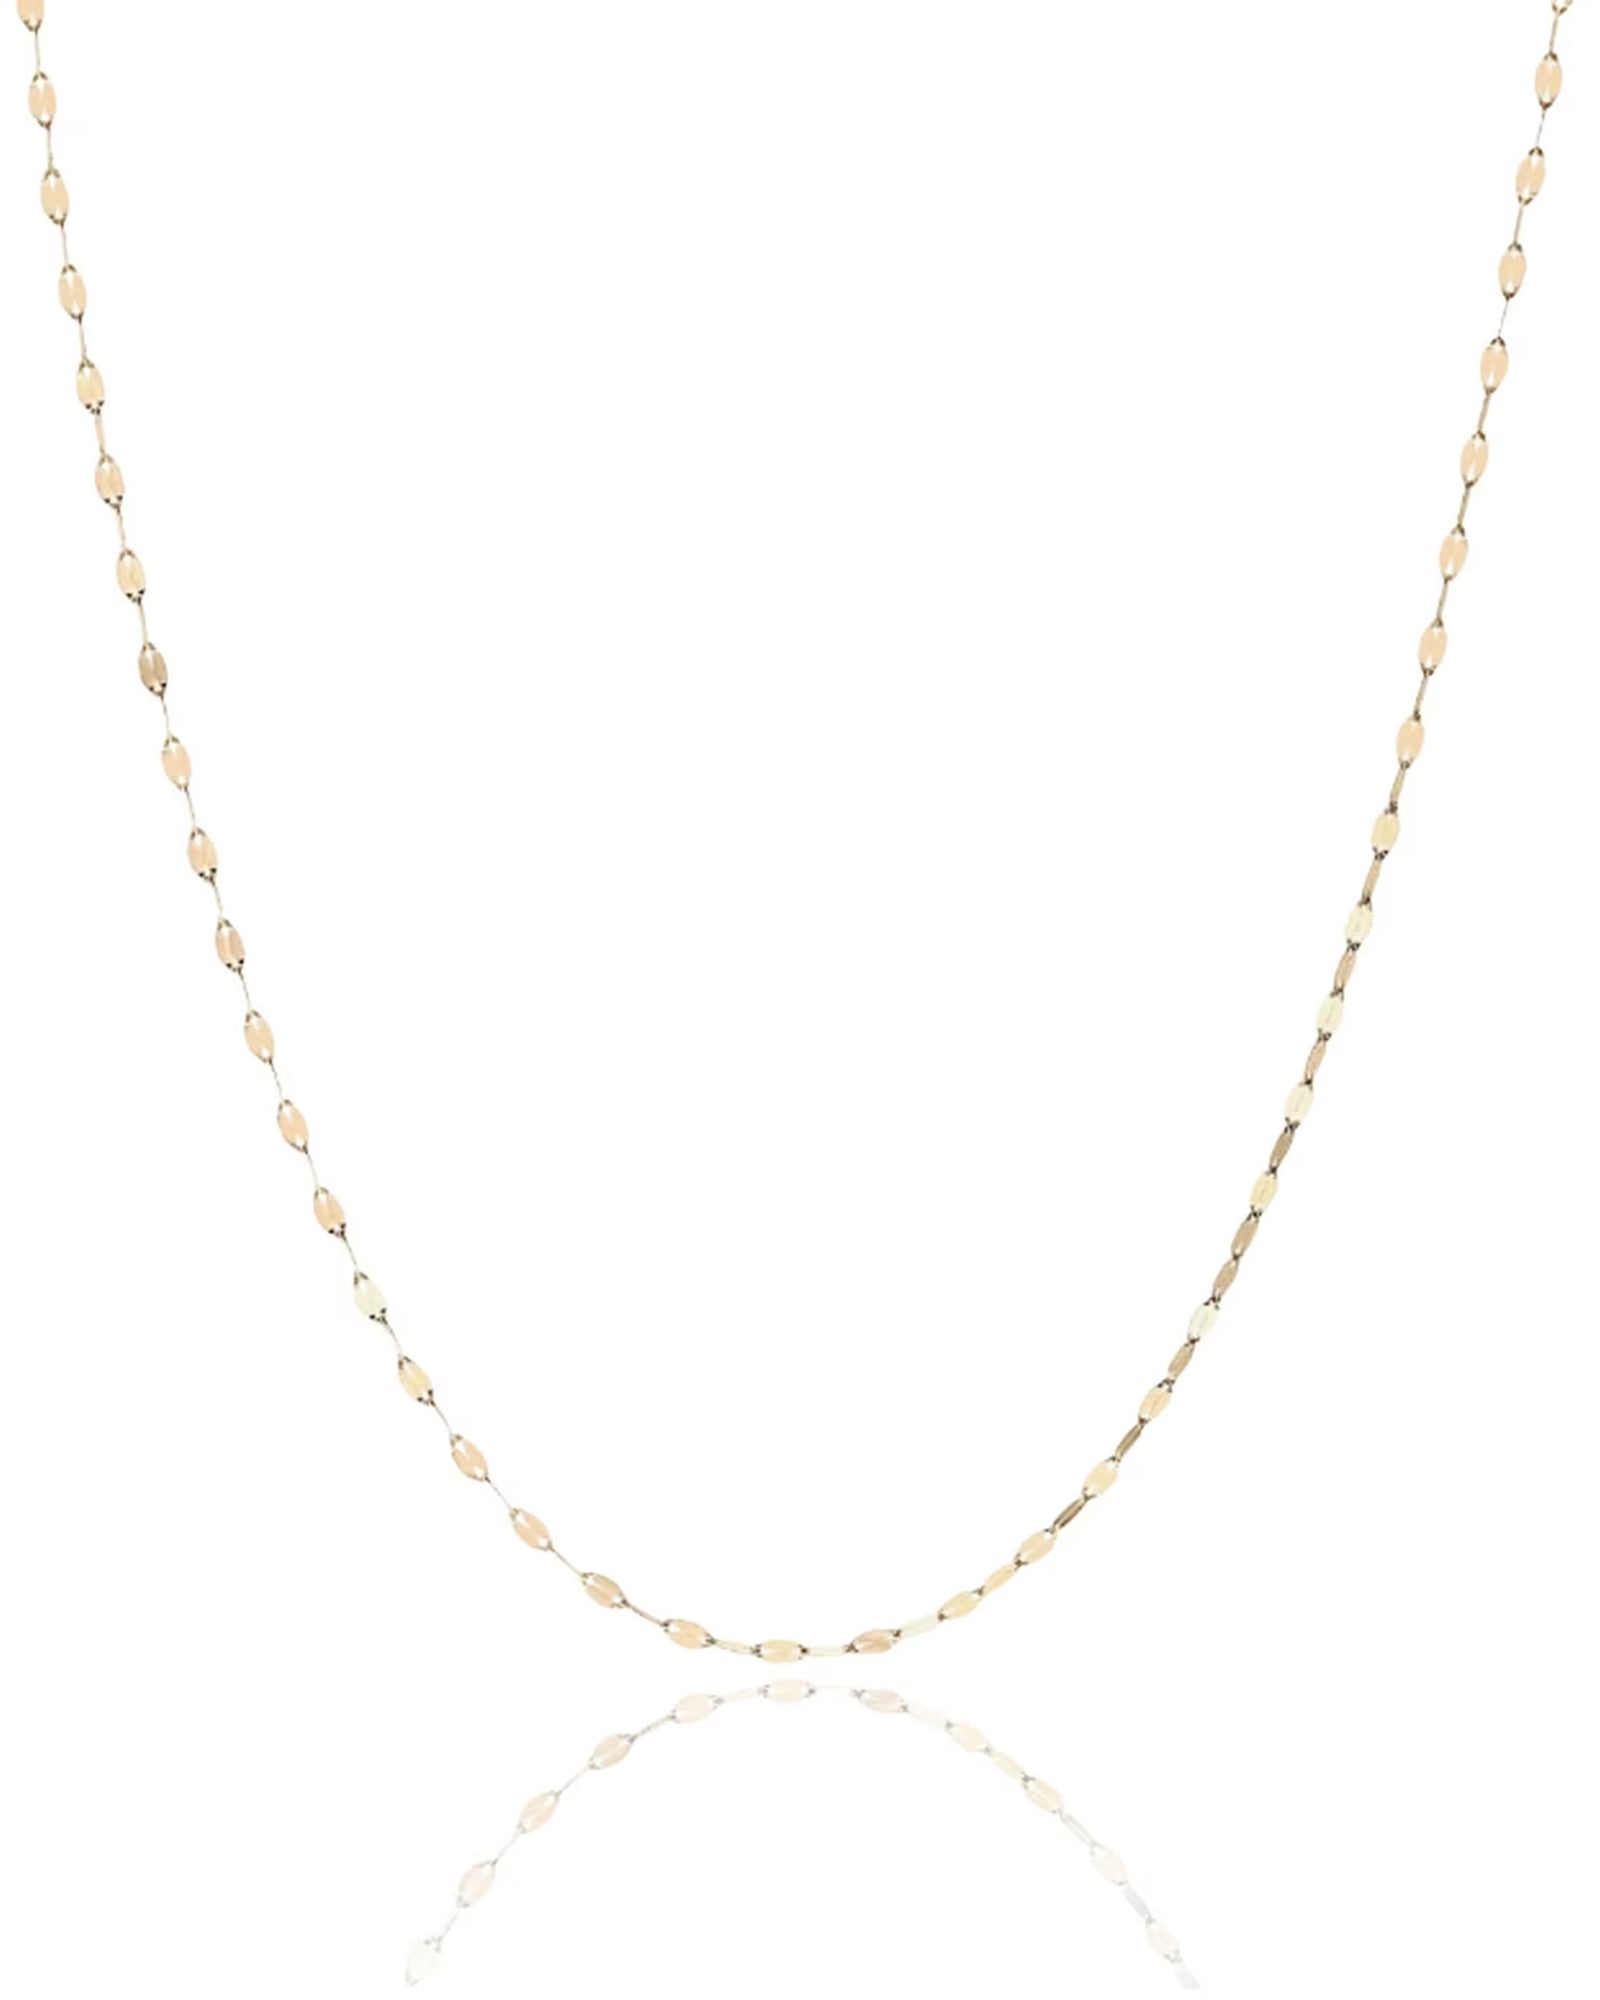 Solid gold necklace chain with sequin links hanging against a blank white background with a reflective surface underneath.